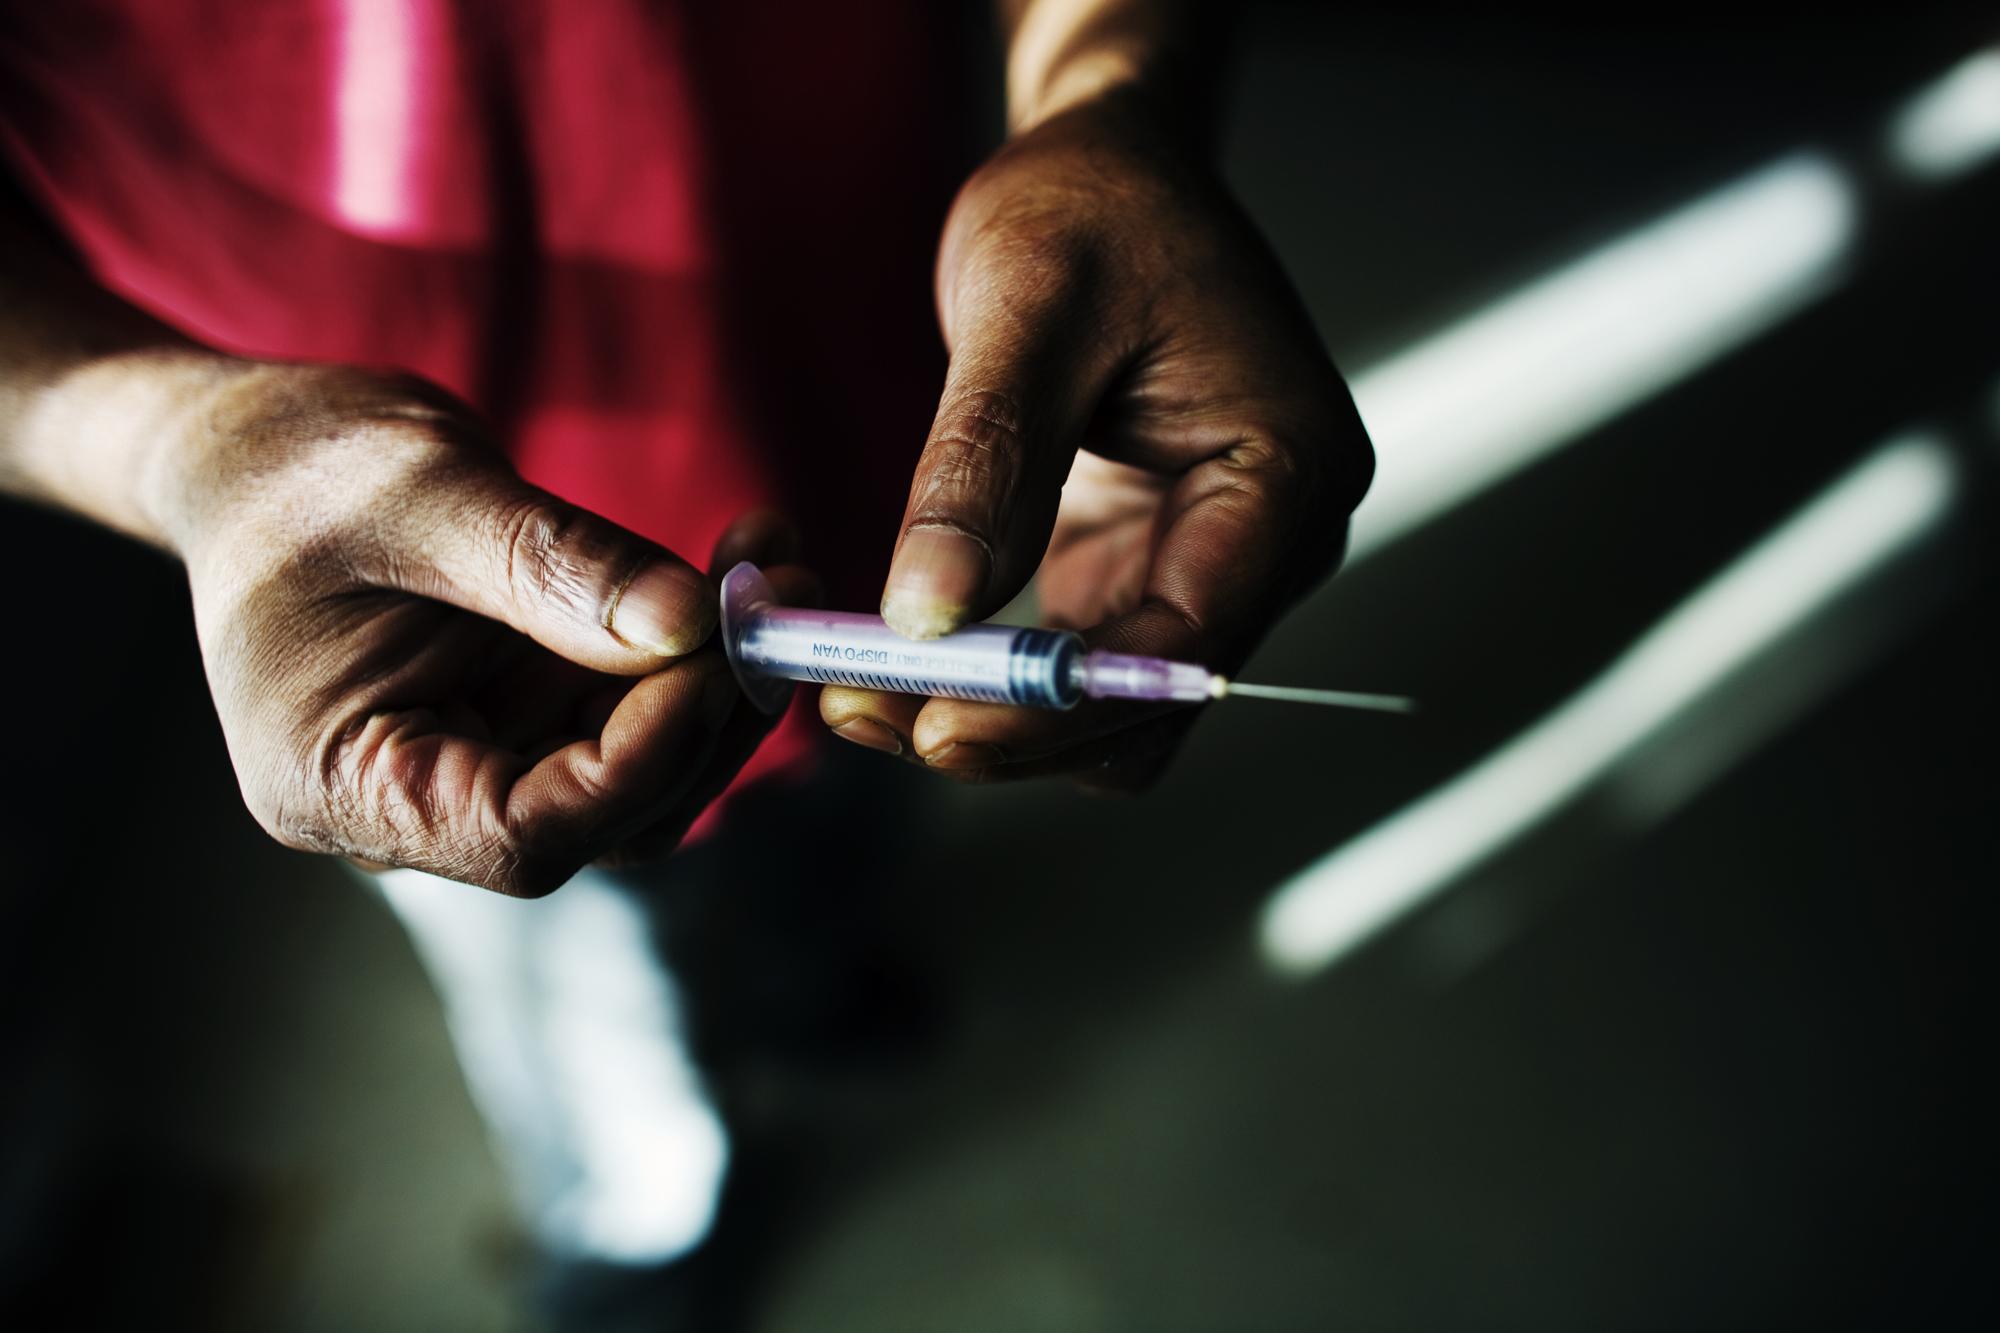 INDIA Aizawl, Mizoram A drug user showing the syringe that he uses to inject the drug spasmo proxyvon (SP), a cheap substitute for heroin and a very common drug in northeast India. Spasmo proxyvon often causes abscesses on the legs and other parts of the body when injected.